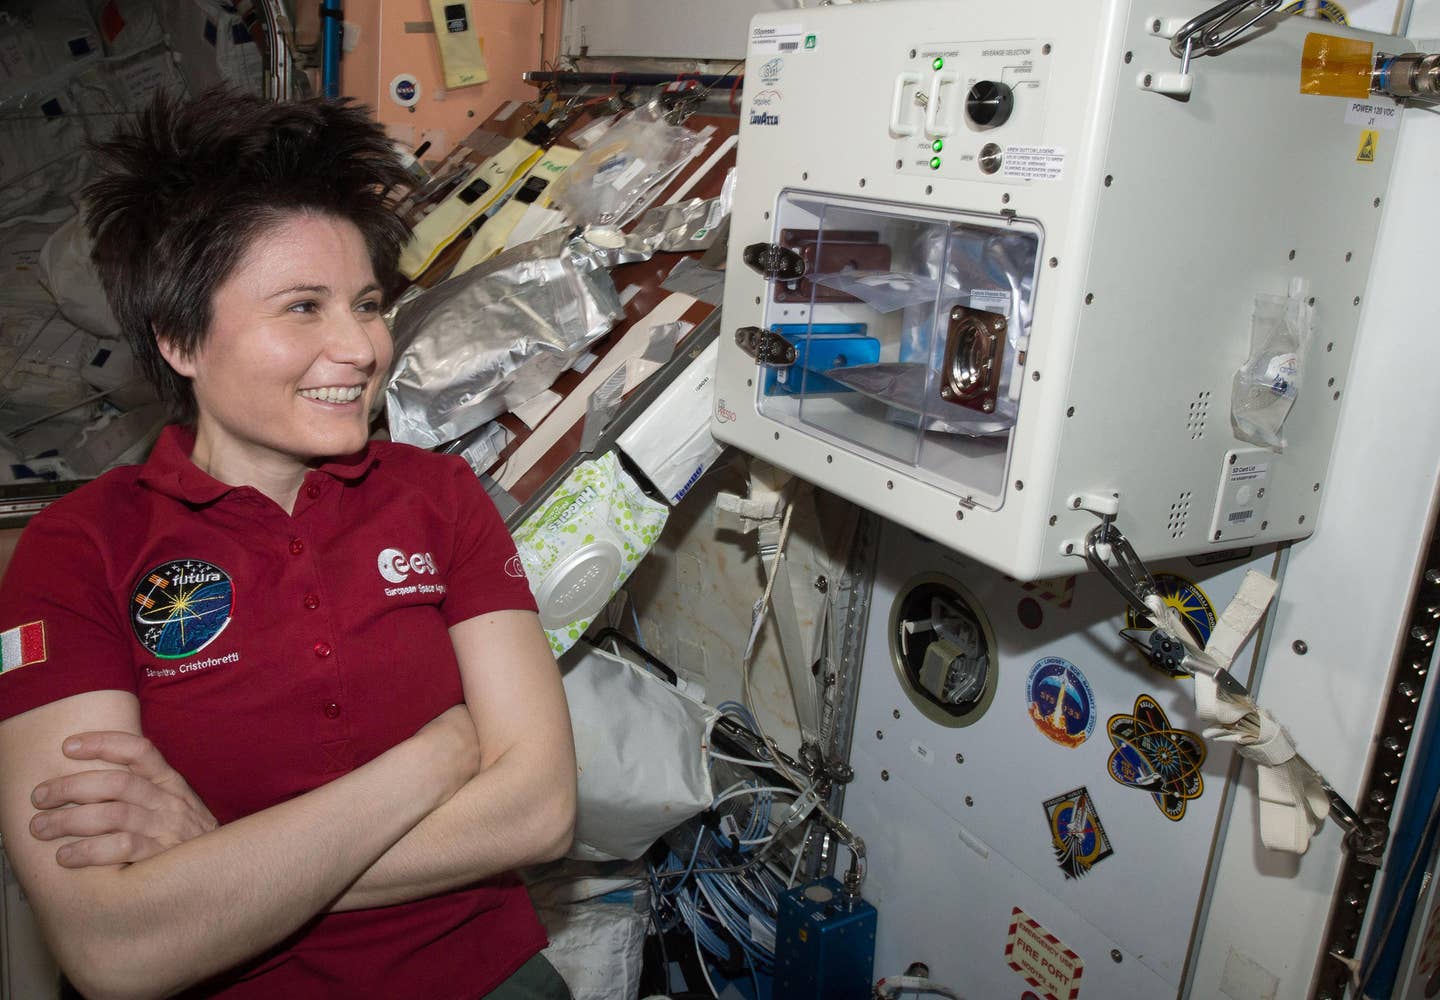 European Space Agency Astronaut Samantha Cristoforetti waits next to the newly installed ISSpresso machine. The espresso device allows crews to make tea, coffee, broth, or other hot beverages.